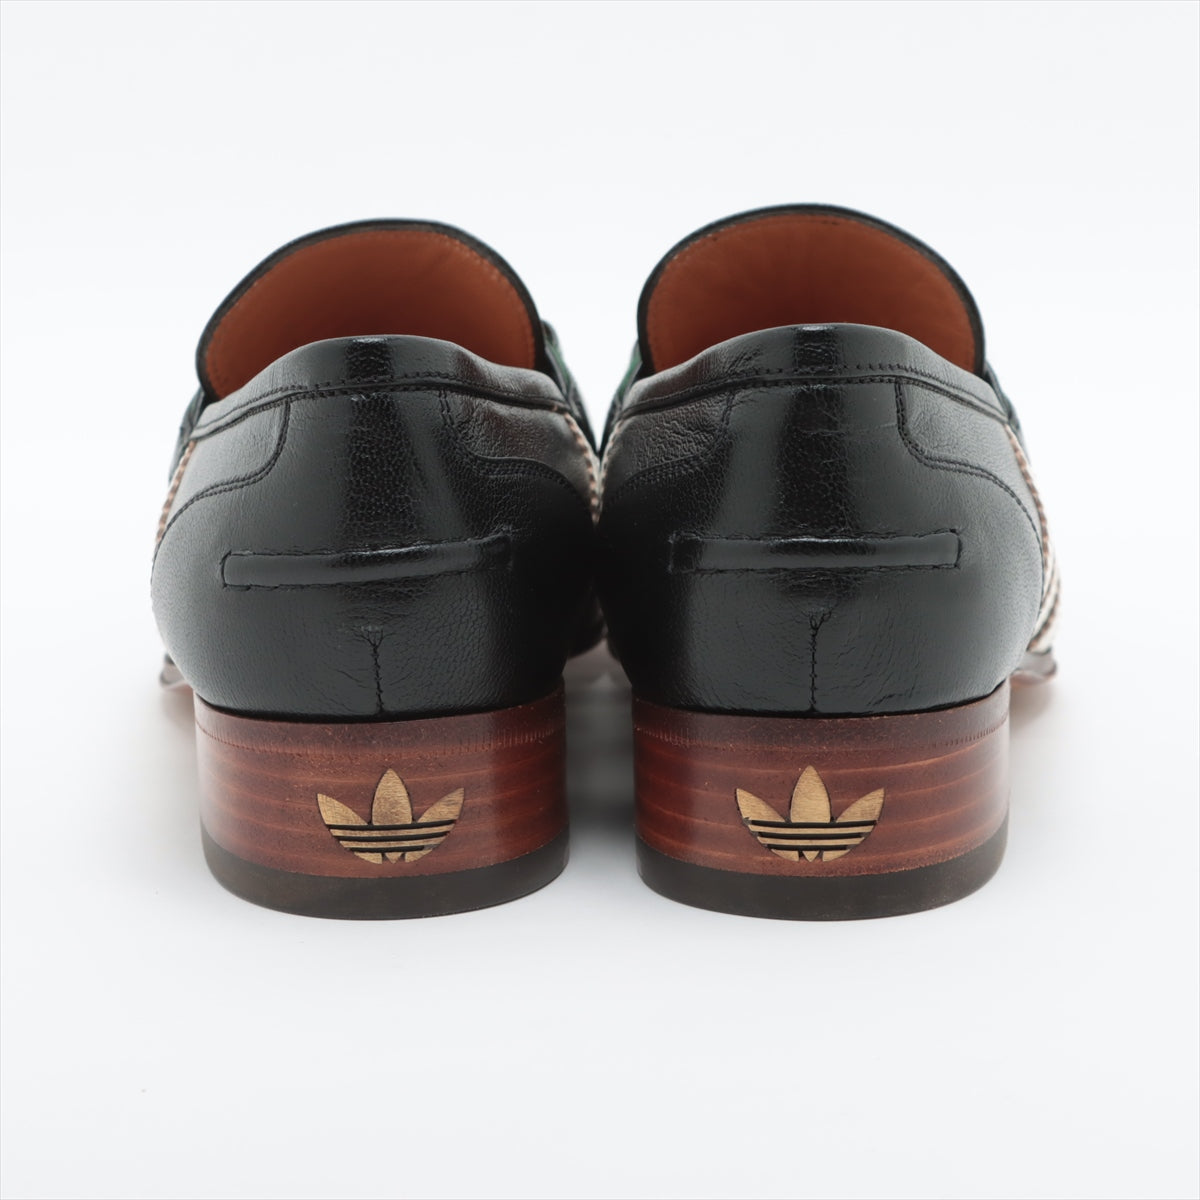 Gucci x adidas Horsebit Leather Loafer EU35 1/2 Ladies' Black 702284 Sherry Line box There is a bag